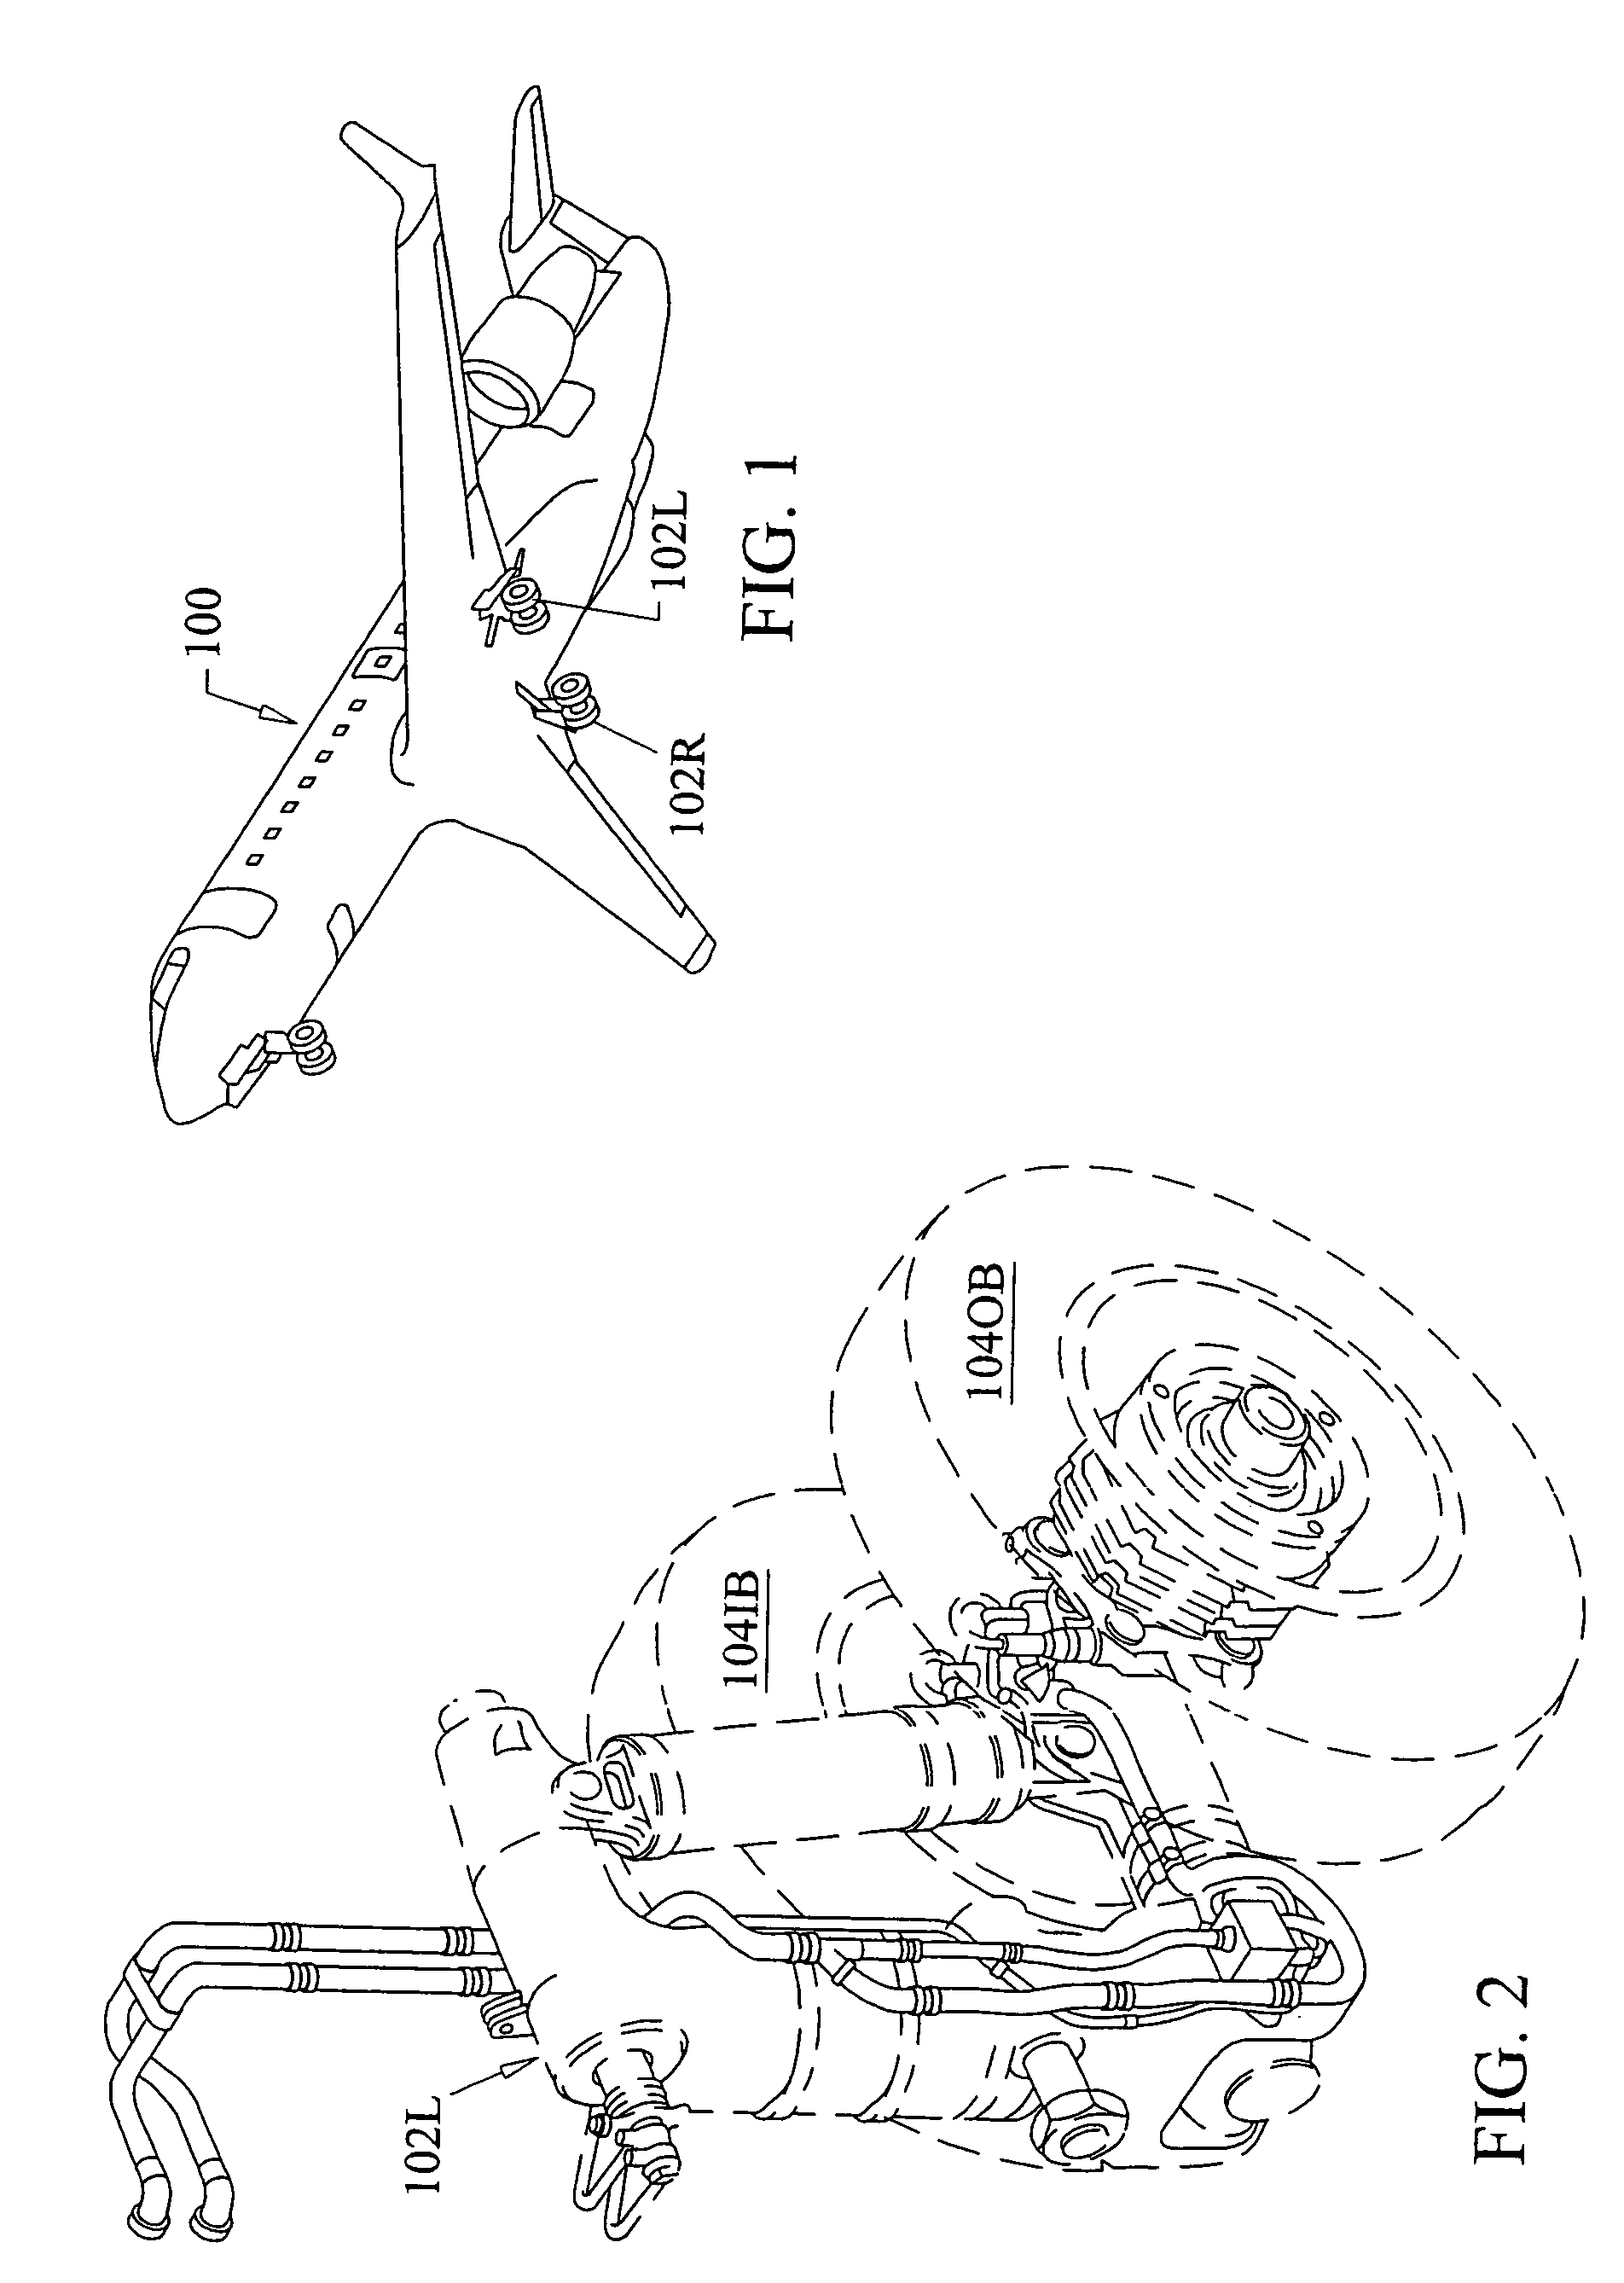 Modular electrical harness for jet aircraft landing gear systems